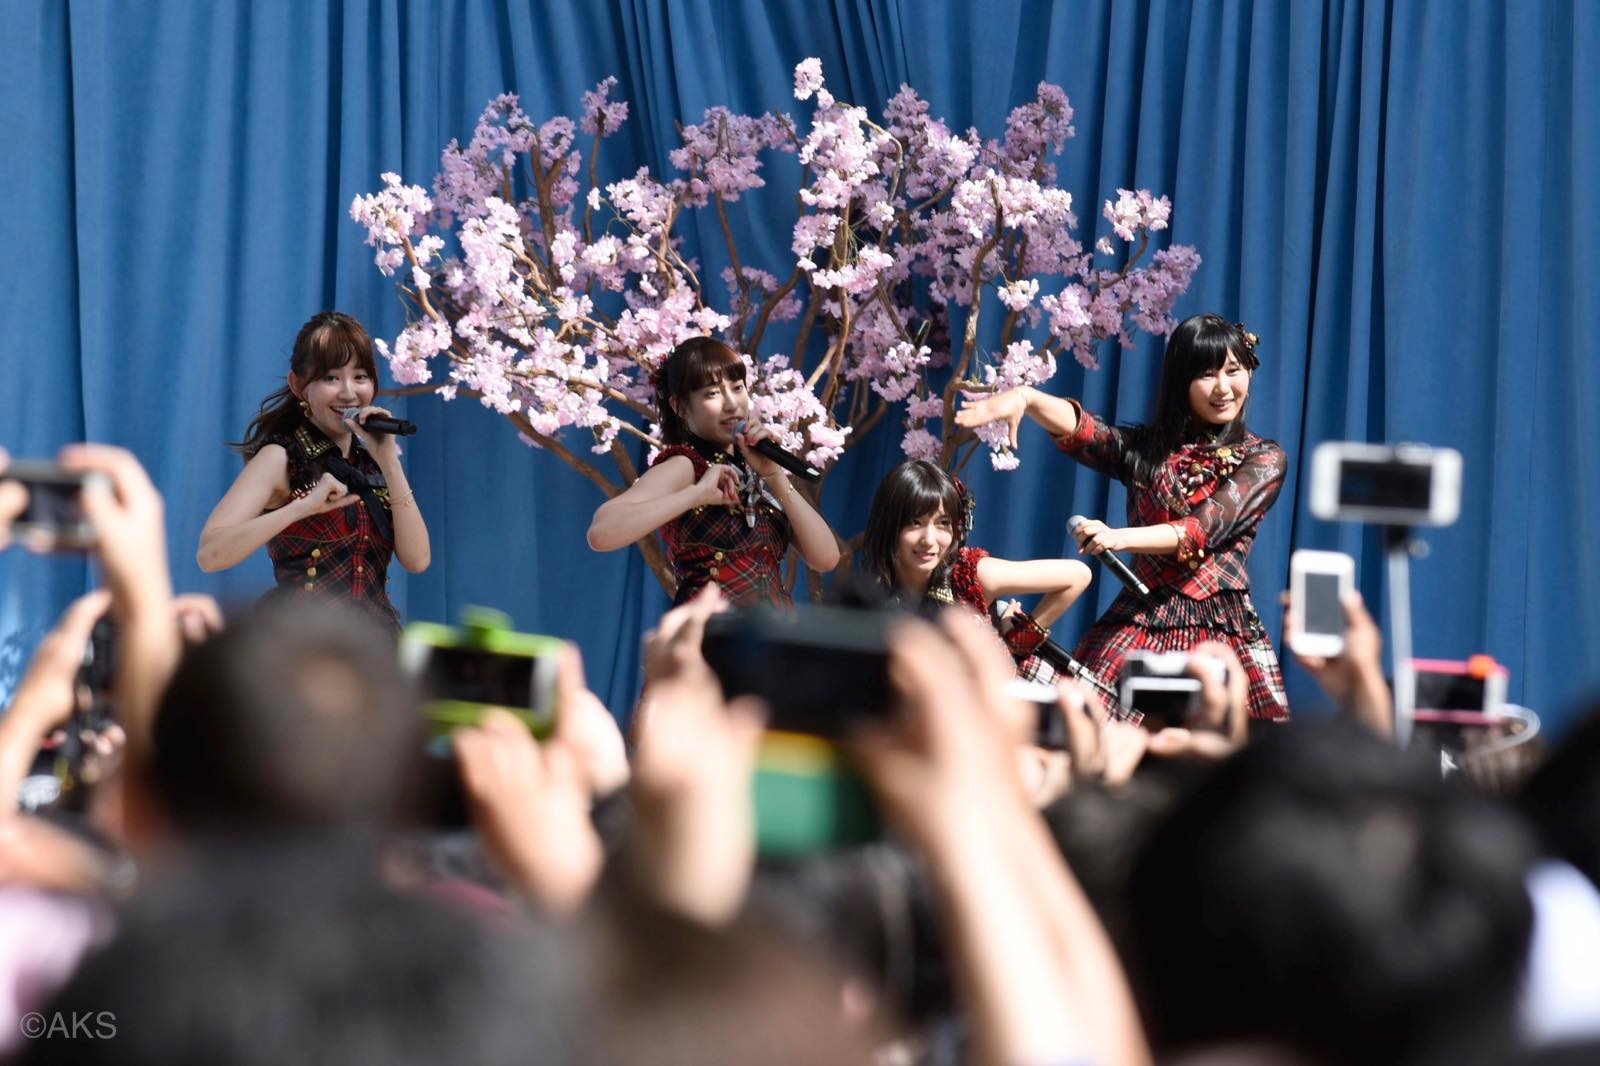 AKB48 in NY for Japan Day 2015 performing for a sea of people watching through their cameras